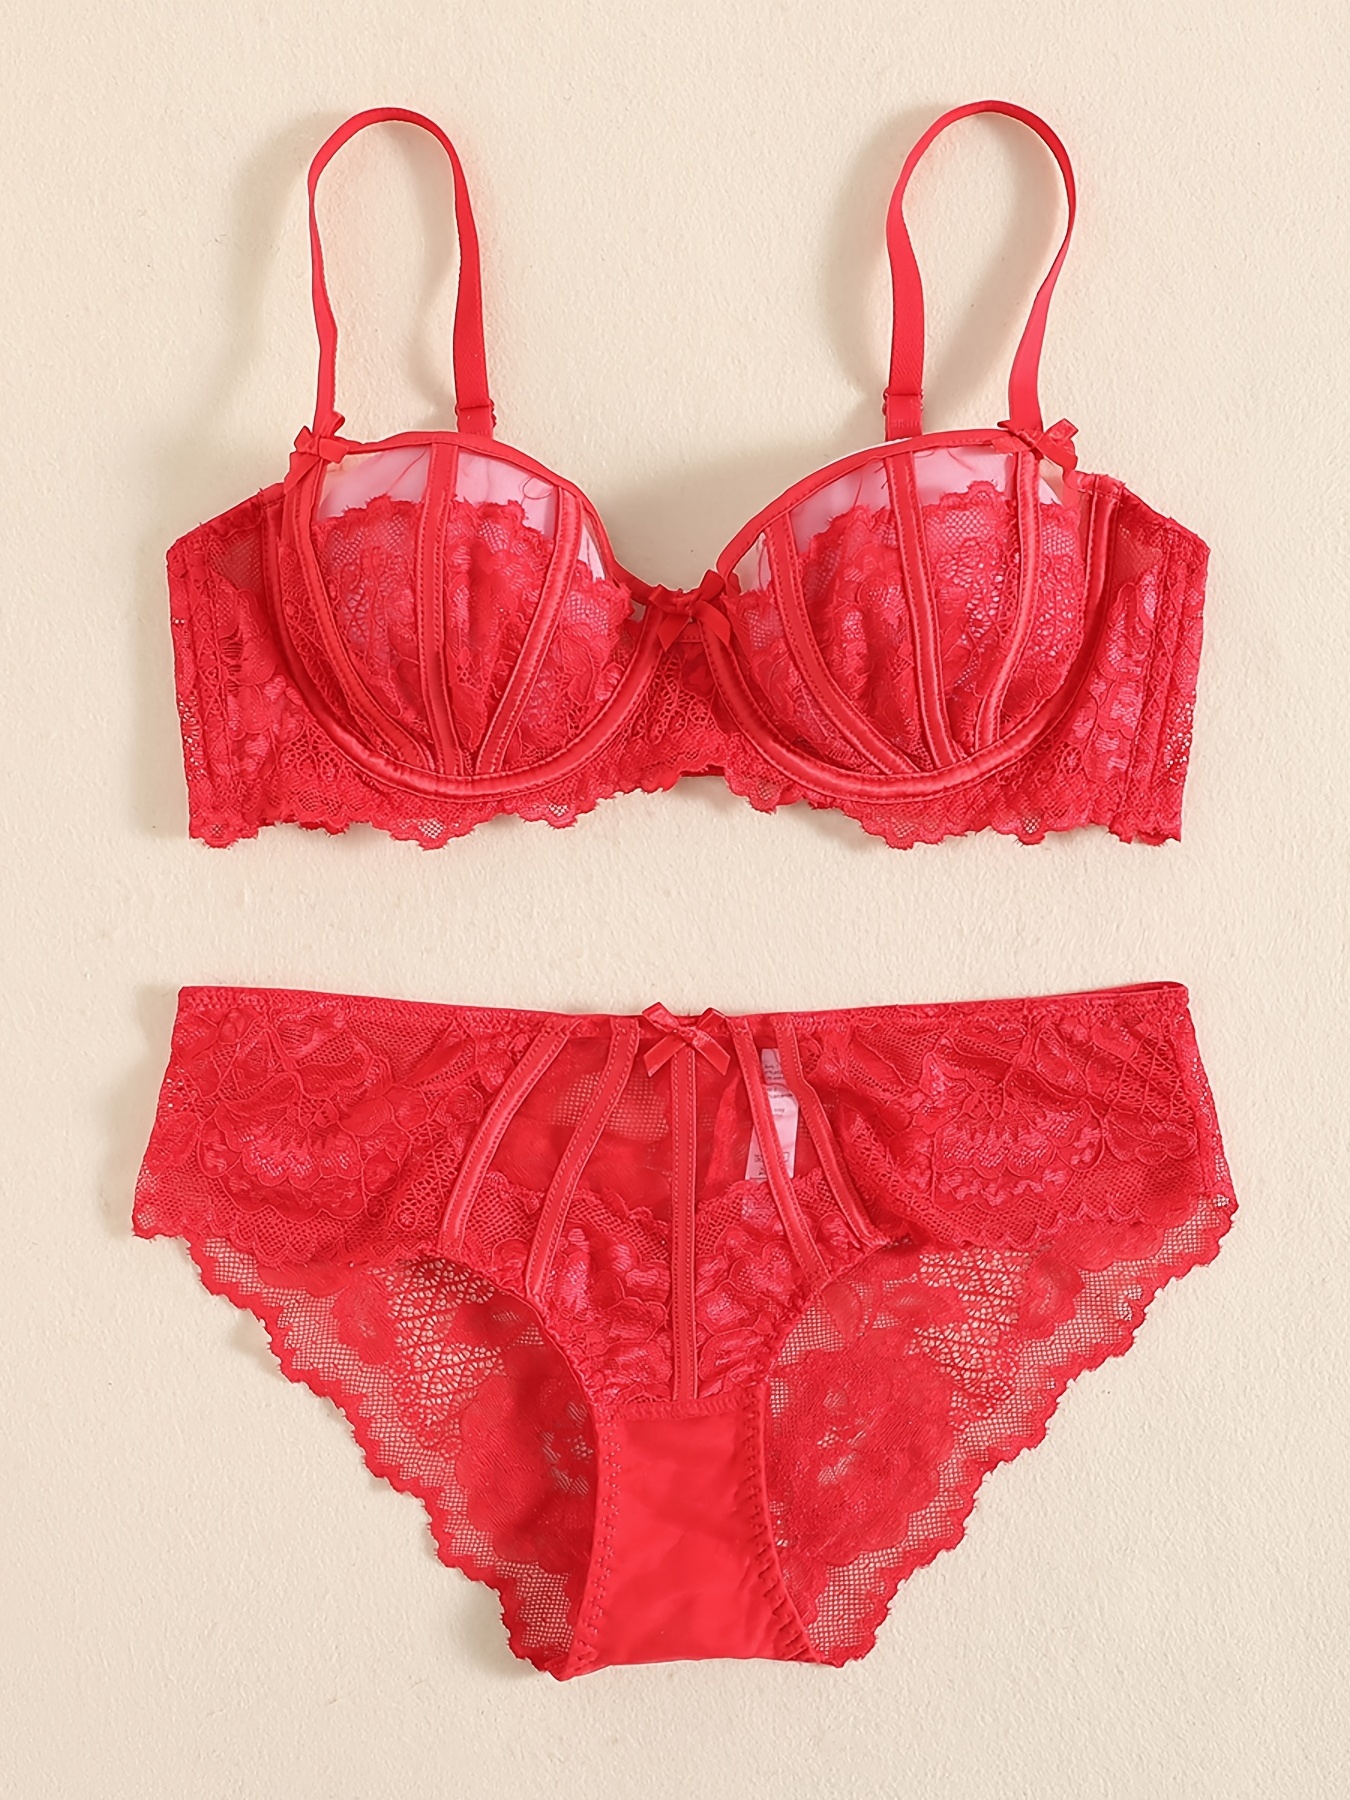 Buy Women Lovely Lace Unlined Balconette Bra and Panty Set with